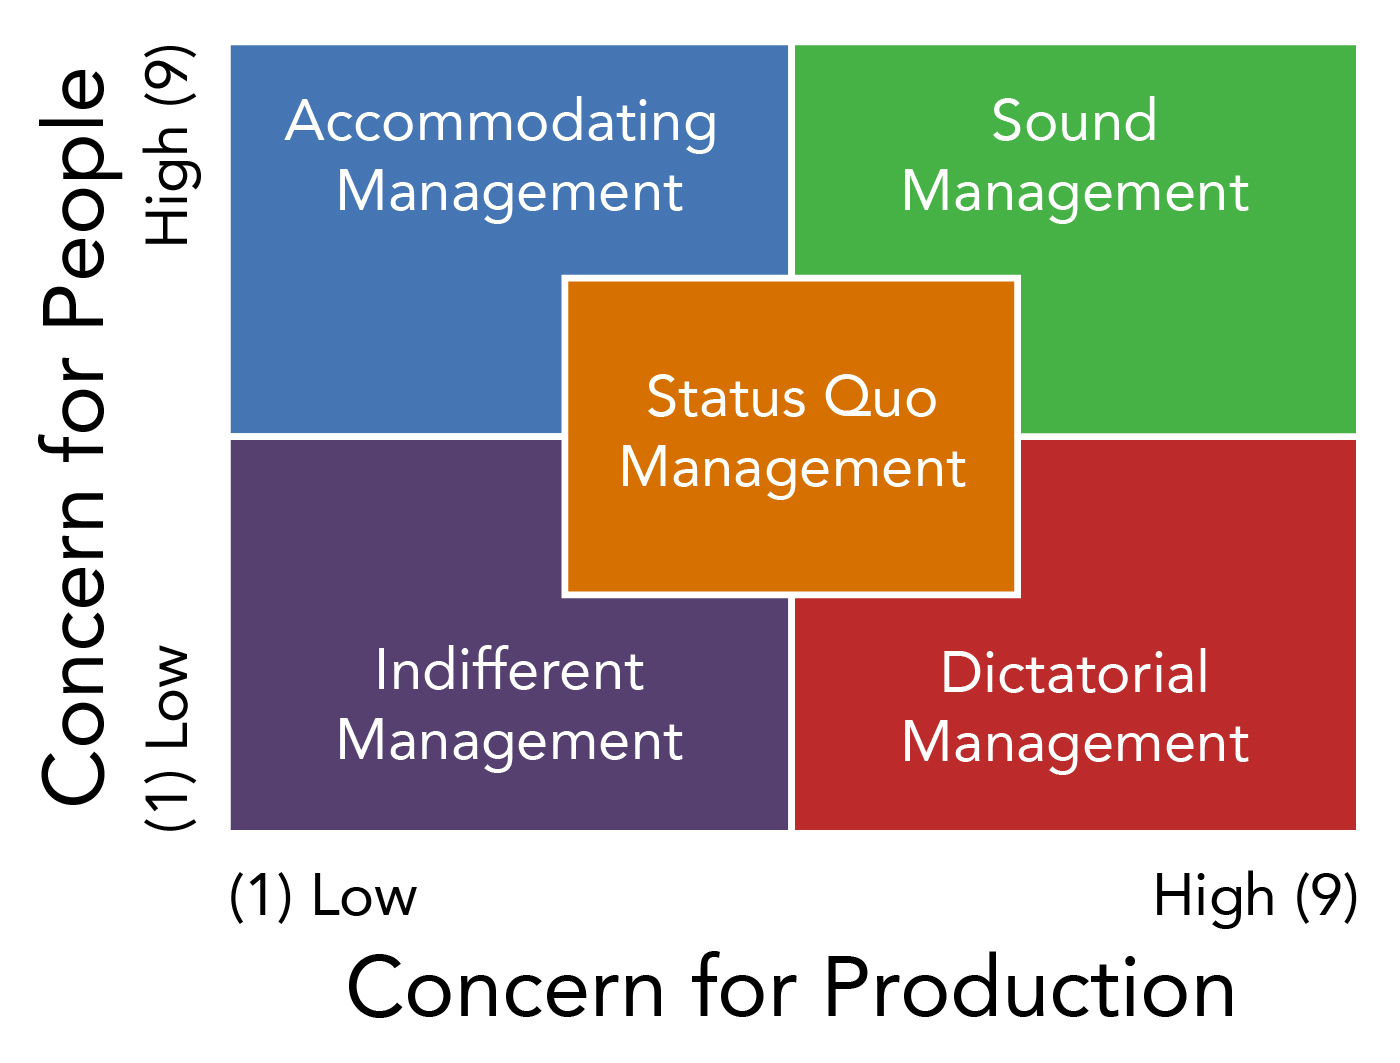 Blake and Mouton’s Managerial Grid. The x-axis has concern for production, rated from low (one) to high (nine). The y-axis has concern for people, rated from low (one) to high (nine). There are five types of management on the grid. Indifferent management has low concern for production and low concern for people. Accommodating management has low concern for production and high concern for people. Dictatorial management has high concern for production and low concern for people. Sound management has high concern for production and high concern for people.